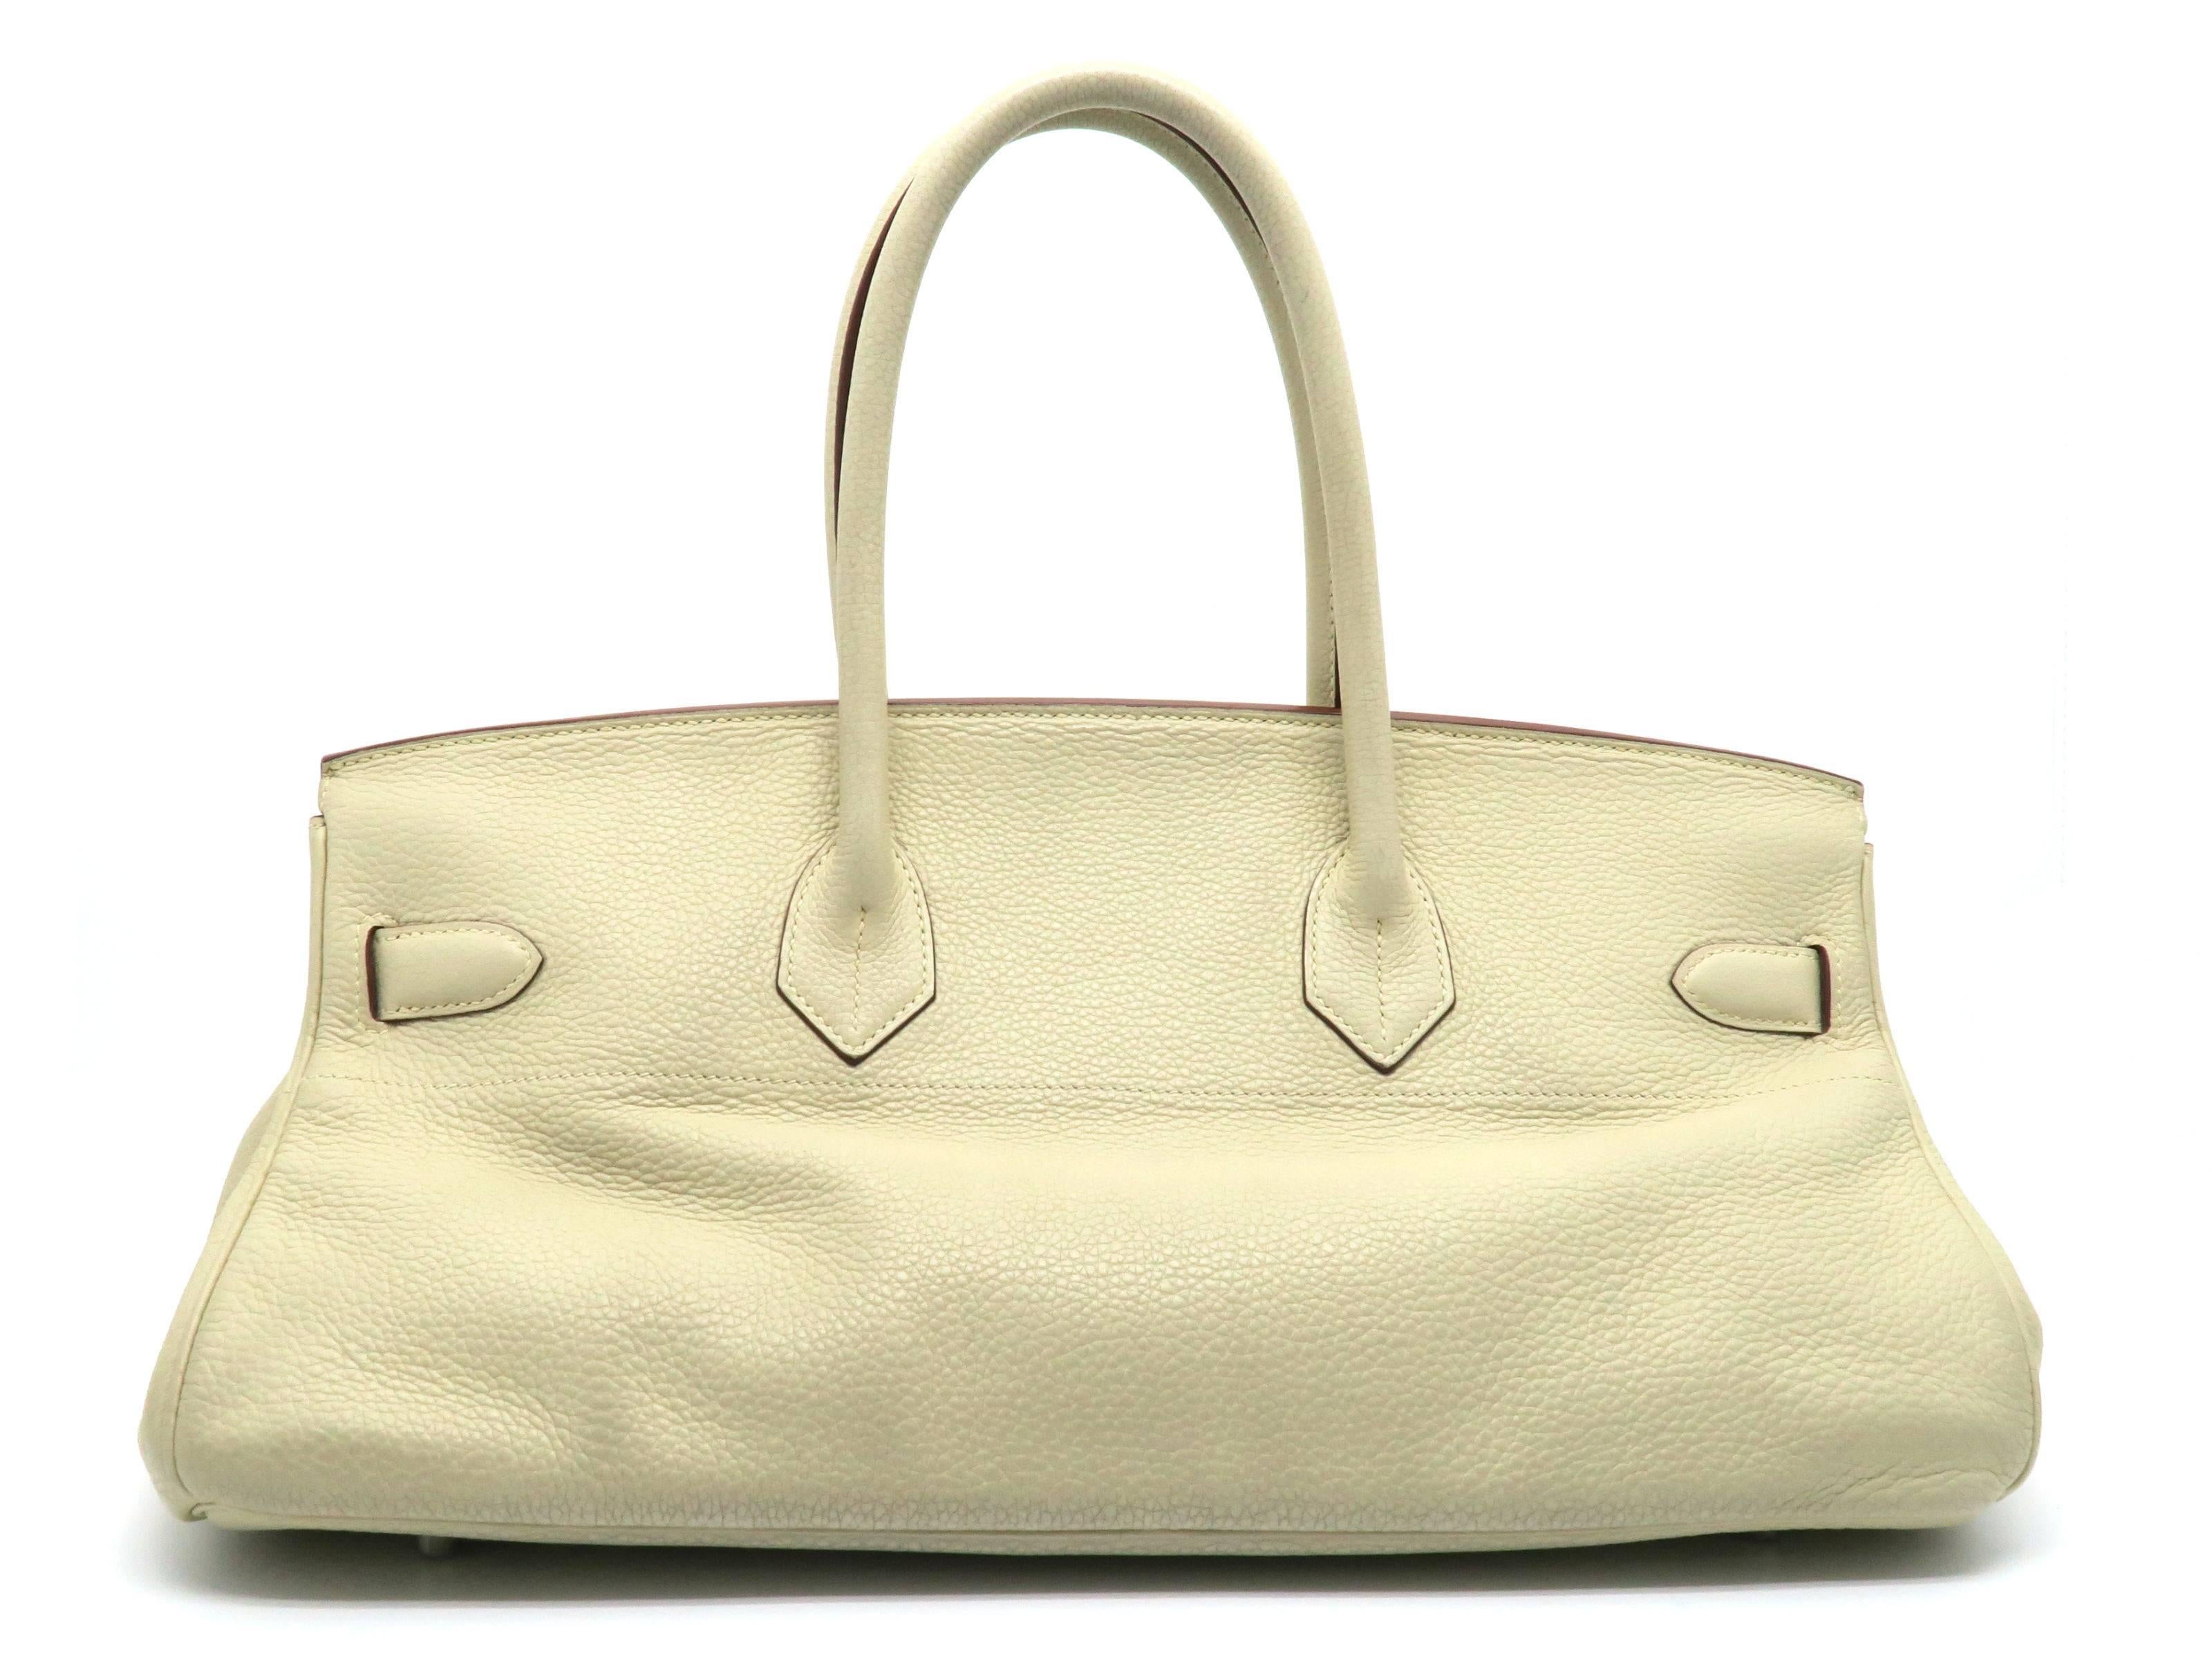 Hermes Shoulder Birkin Jaune Poussin Beige Clemence Leather Top Handle Bag In Excellent Condition For Sale In Kowloon, HK